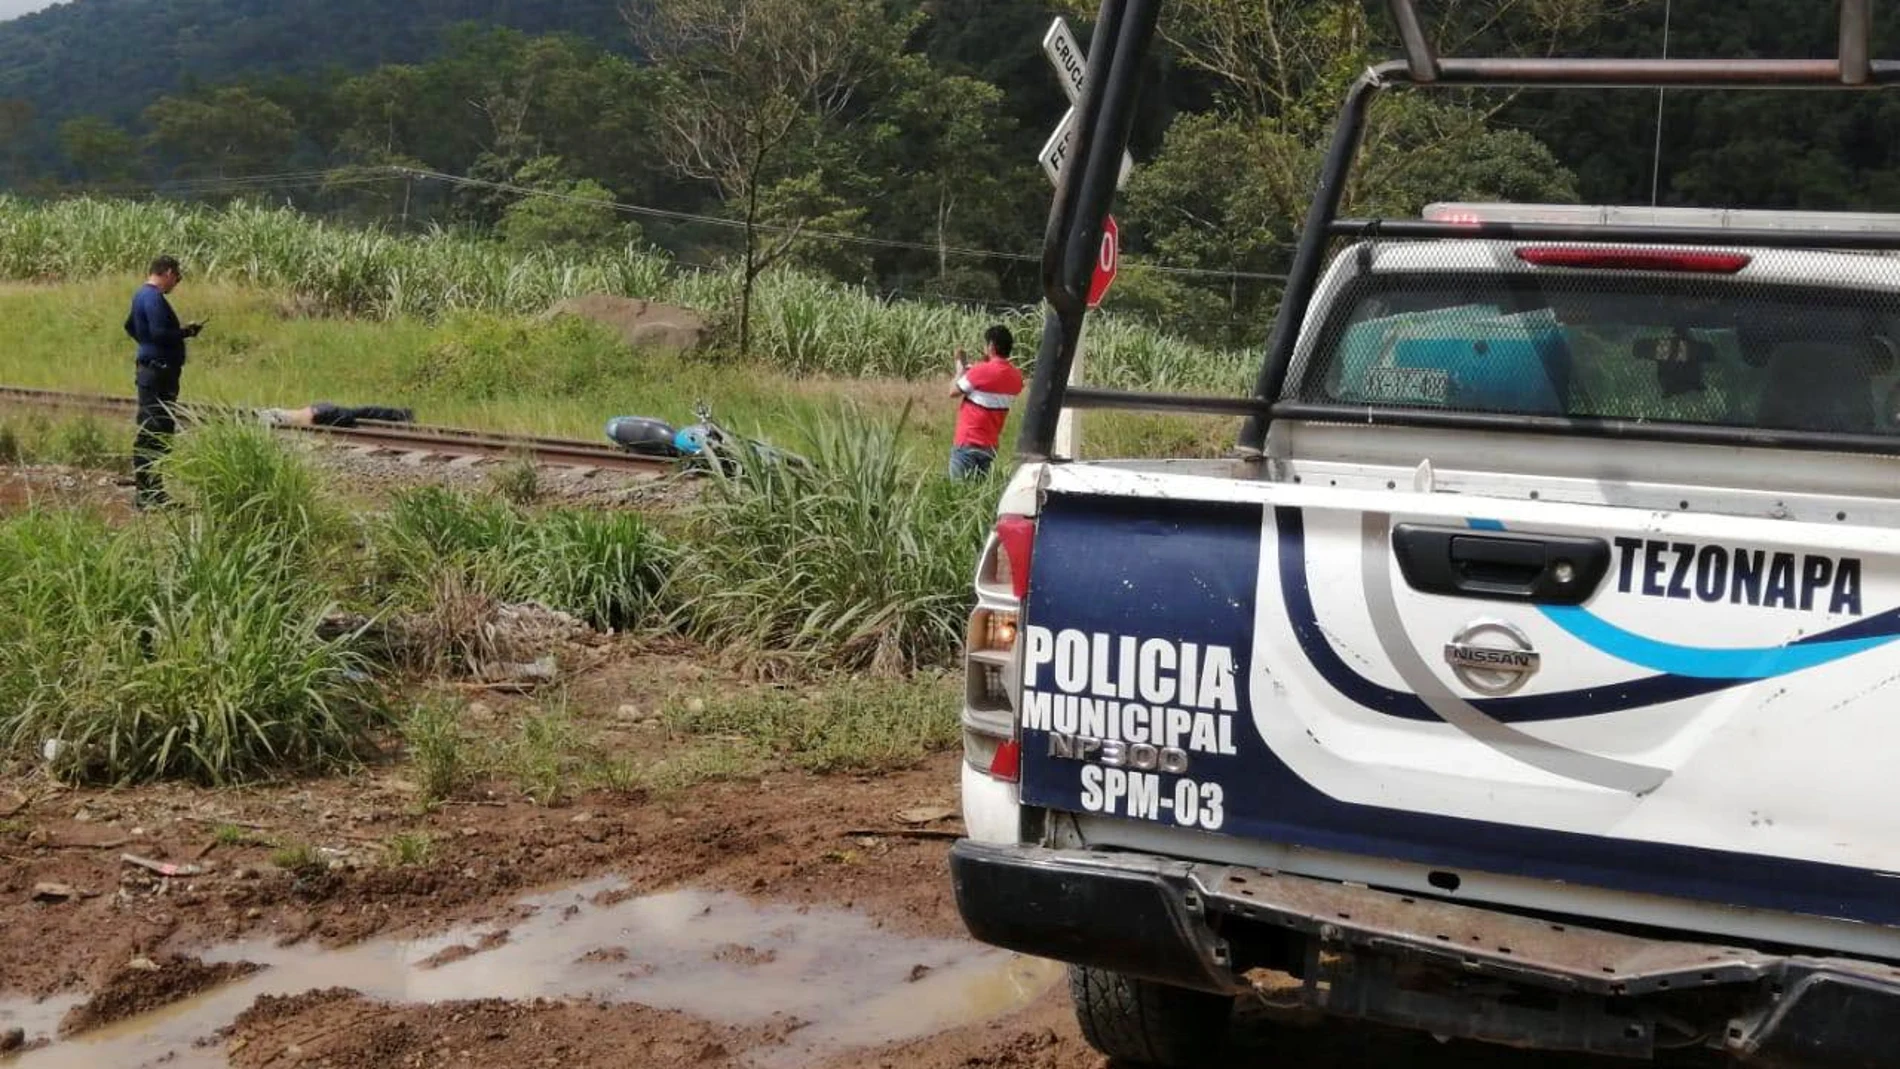 A view of the site where the body of journalist Julio Valdivia was found in Tezonapa